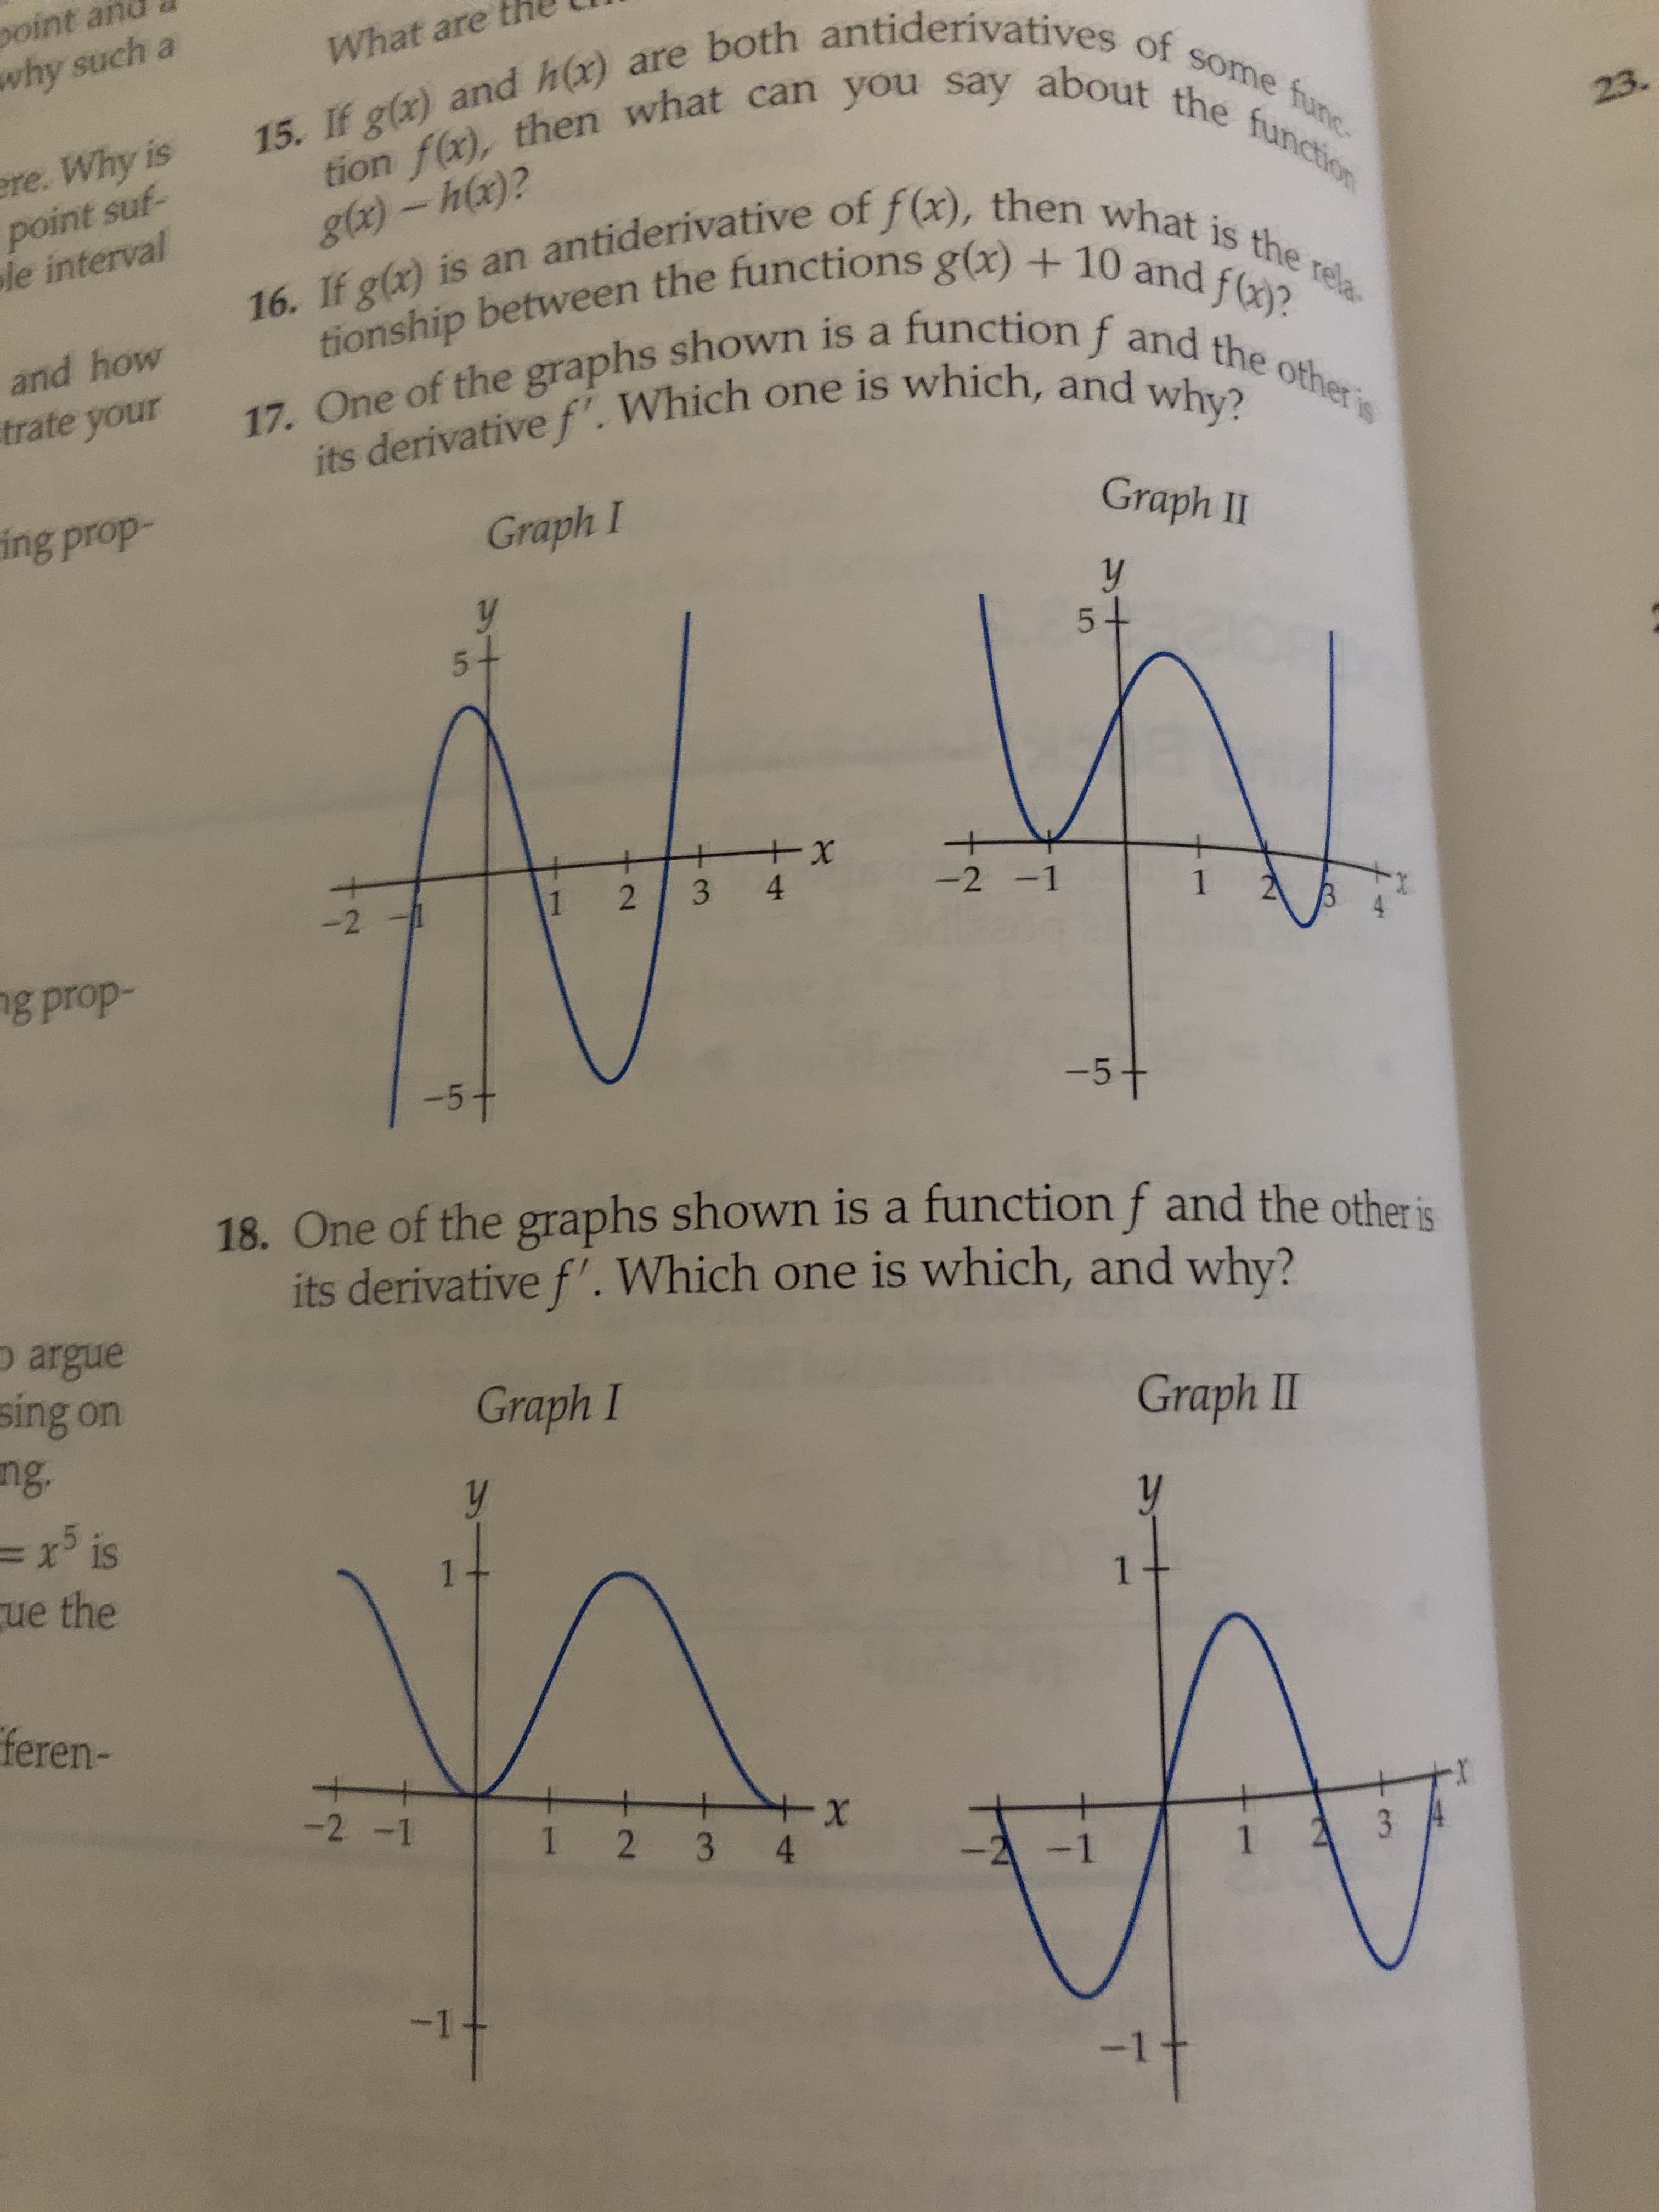 18. One of the graphs shown is a function f and the other is
its derivative f'. Which one is which, and why?
Graph I
GraphII
y
1
2 -1
1 2 3 4
-2-1
1 2 3
-1
-1
